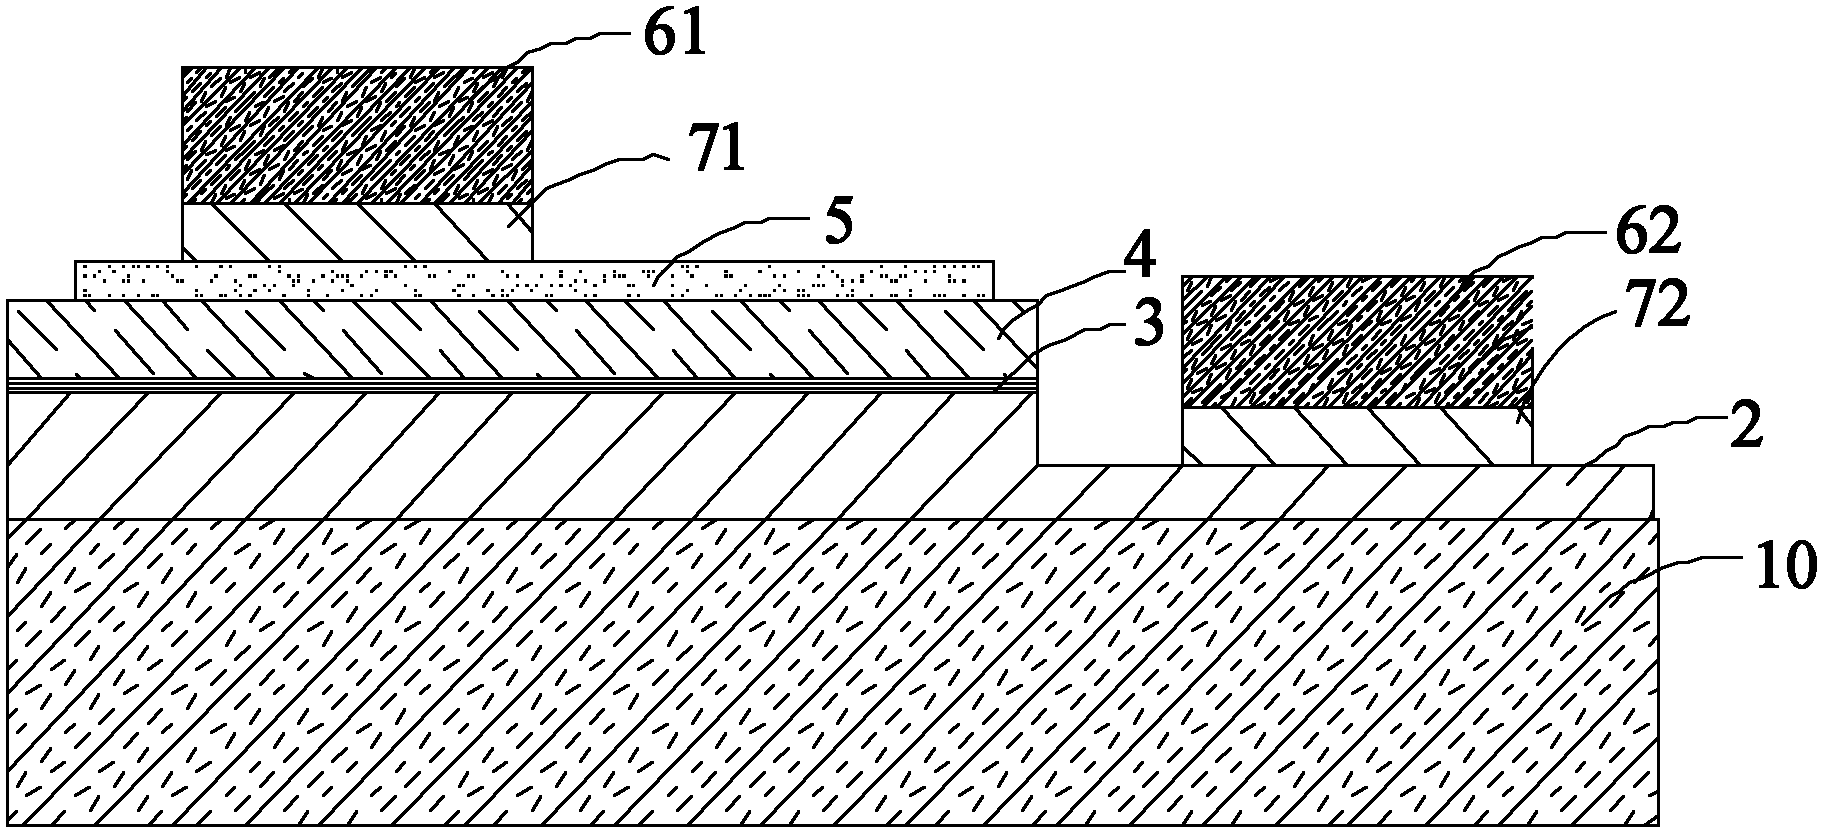 Semiconductor light emitting diode (LED) device and formation method thereof